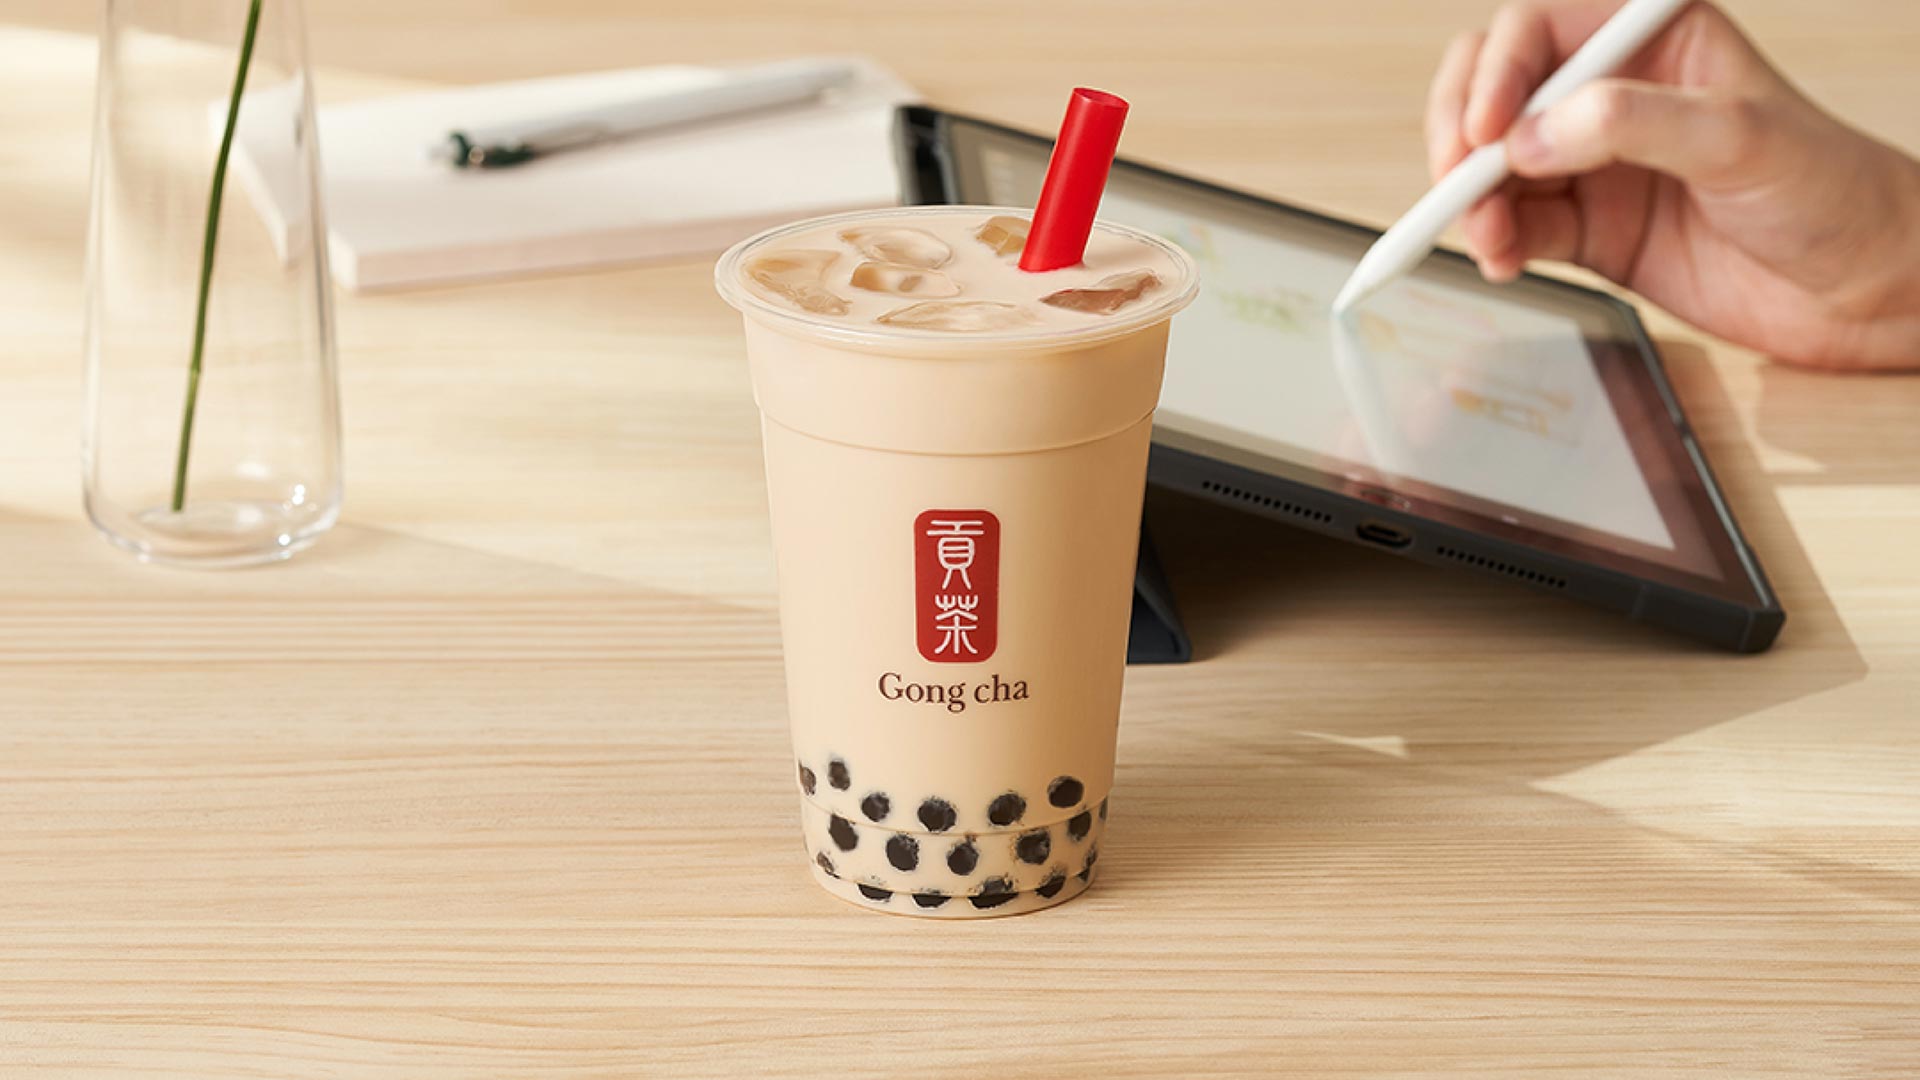 Gong cha drink on table while working